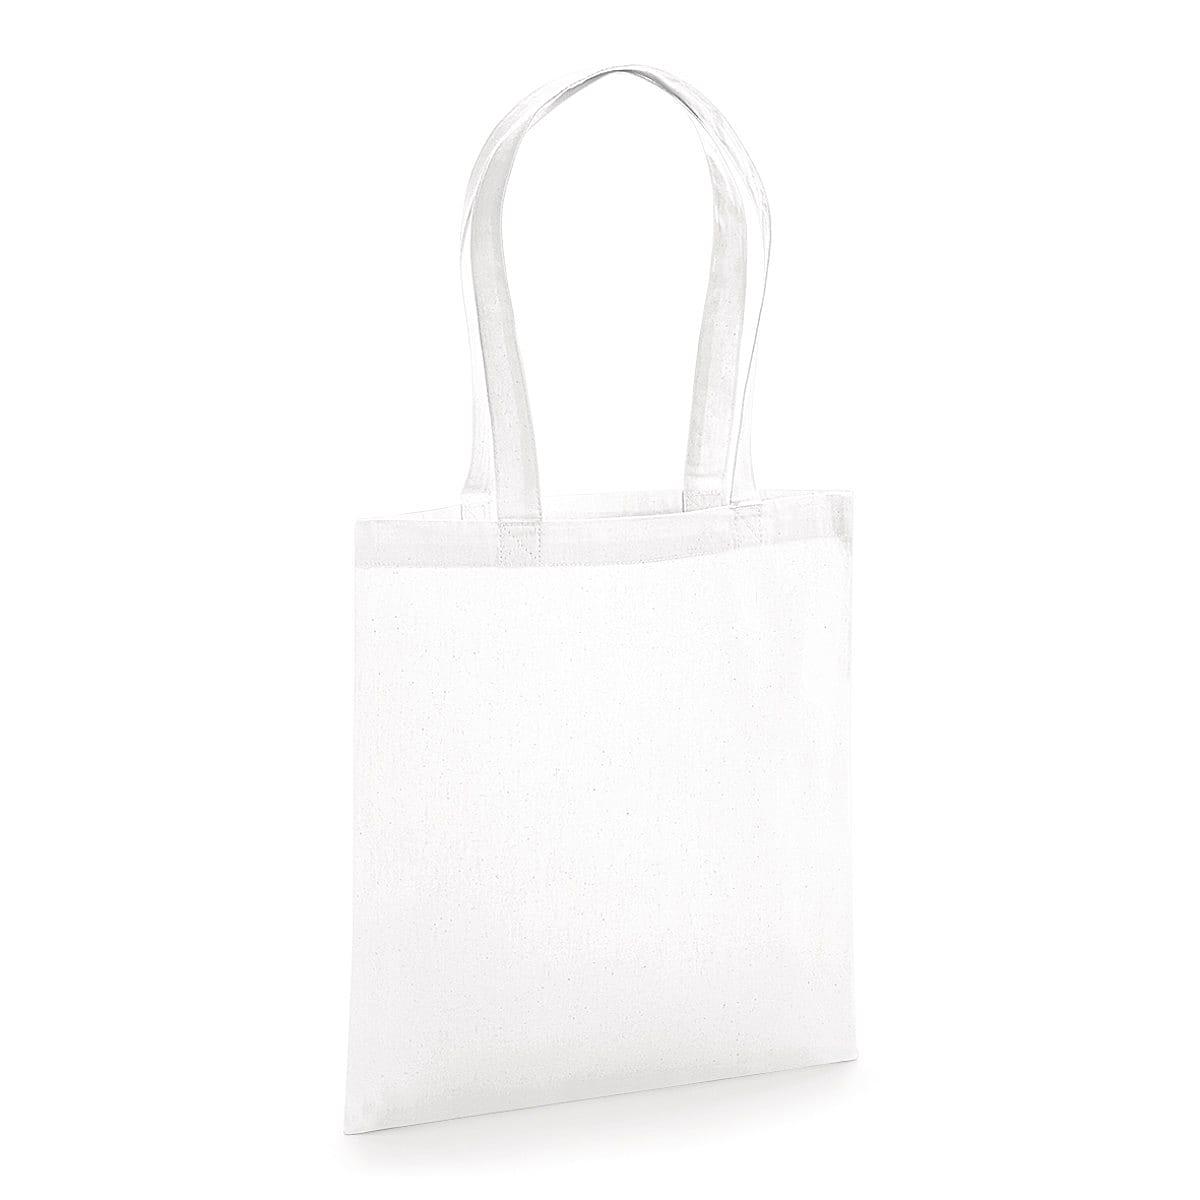 Westford Mill Organic Premium Cotton Tot in White (Product Code: W261)